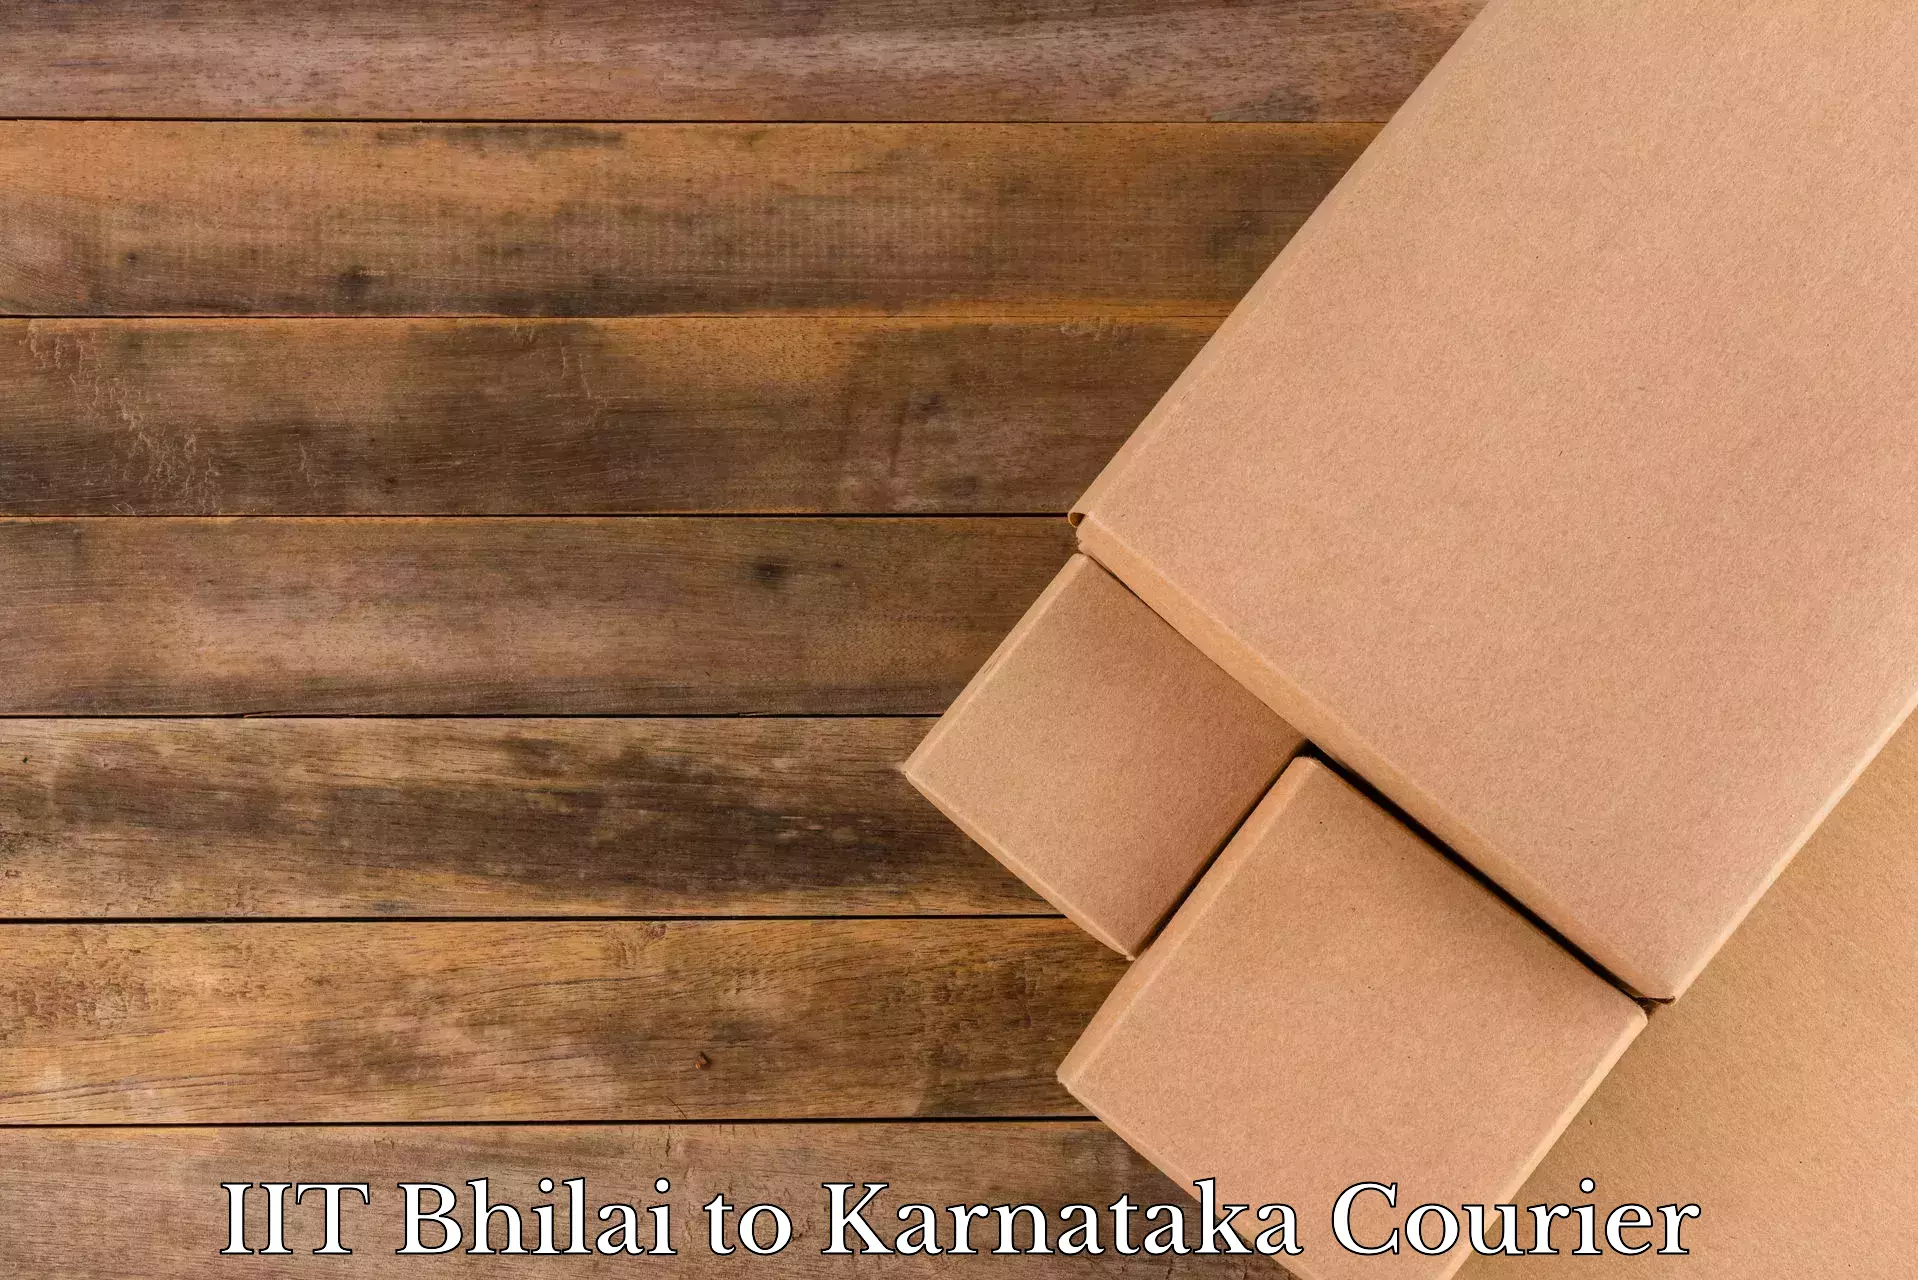 Trusted relocation services IIT Bhilai to Karnataka